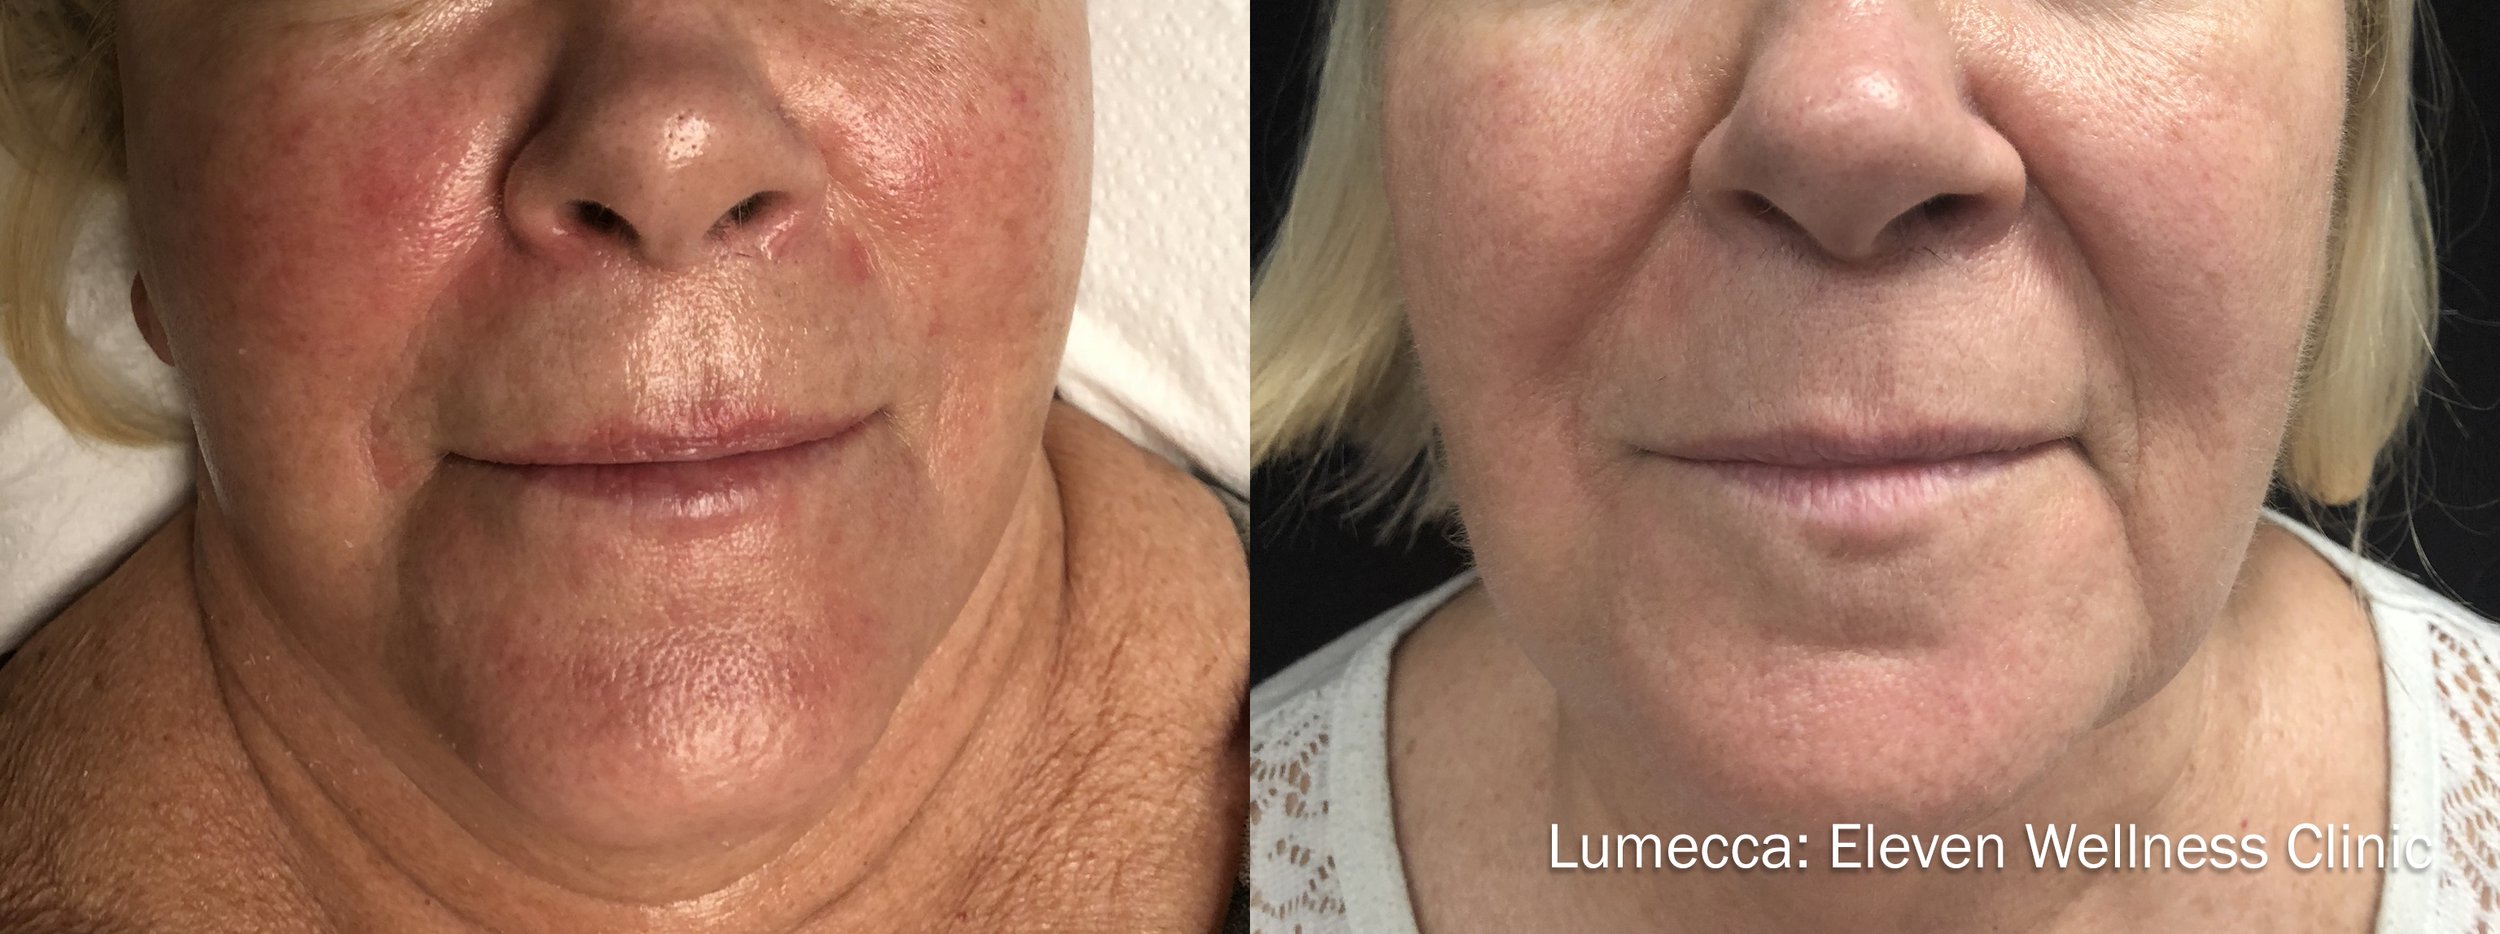 IPL Photofacial before and after results with Lumecca